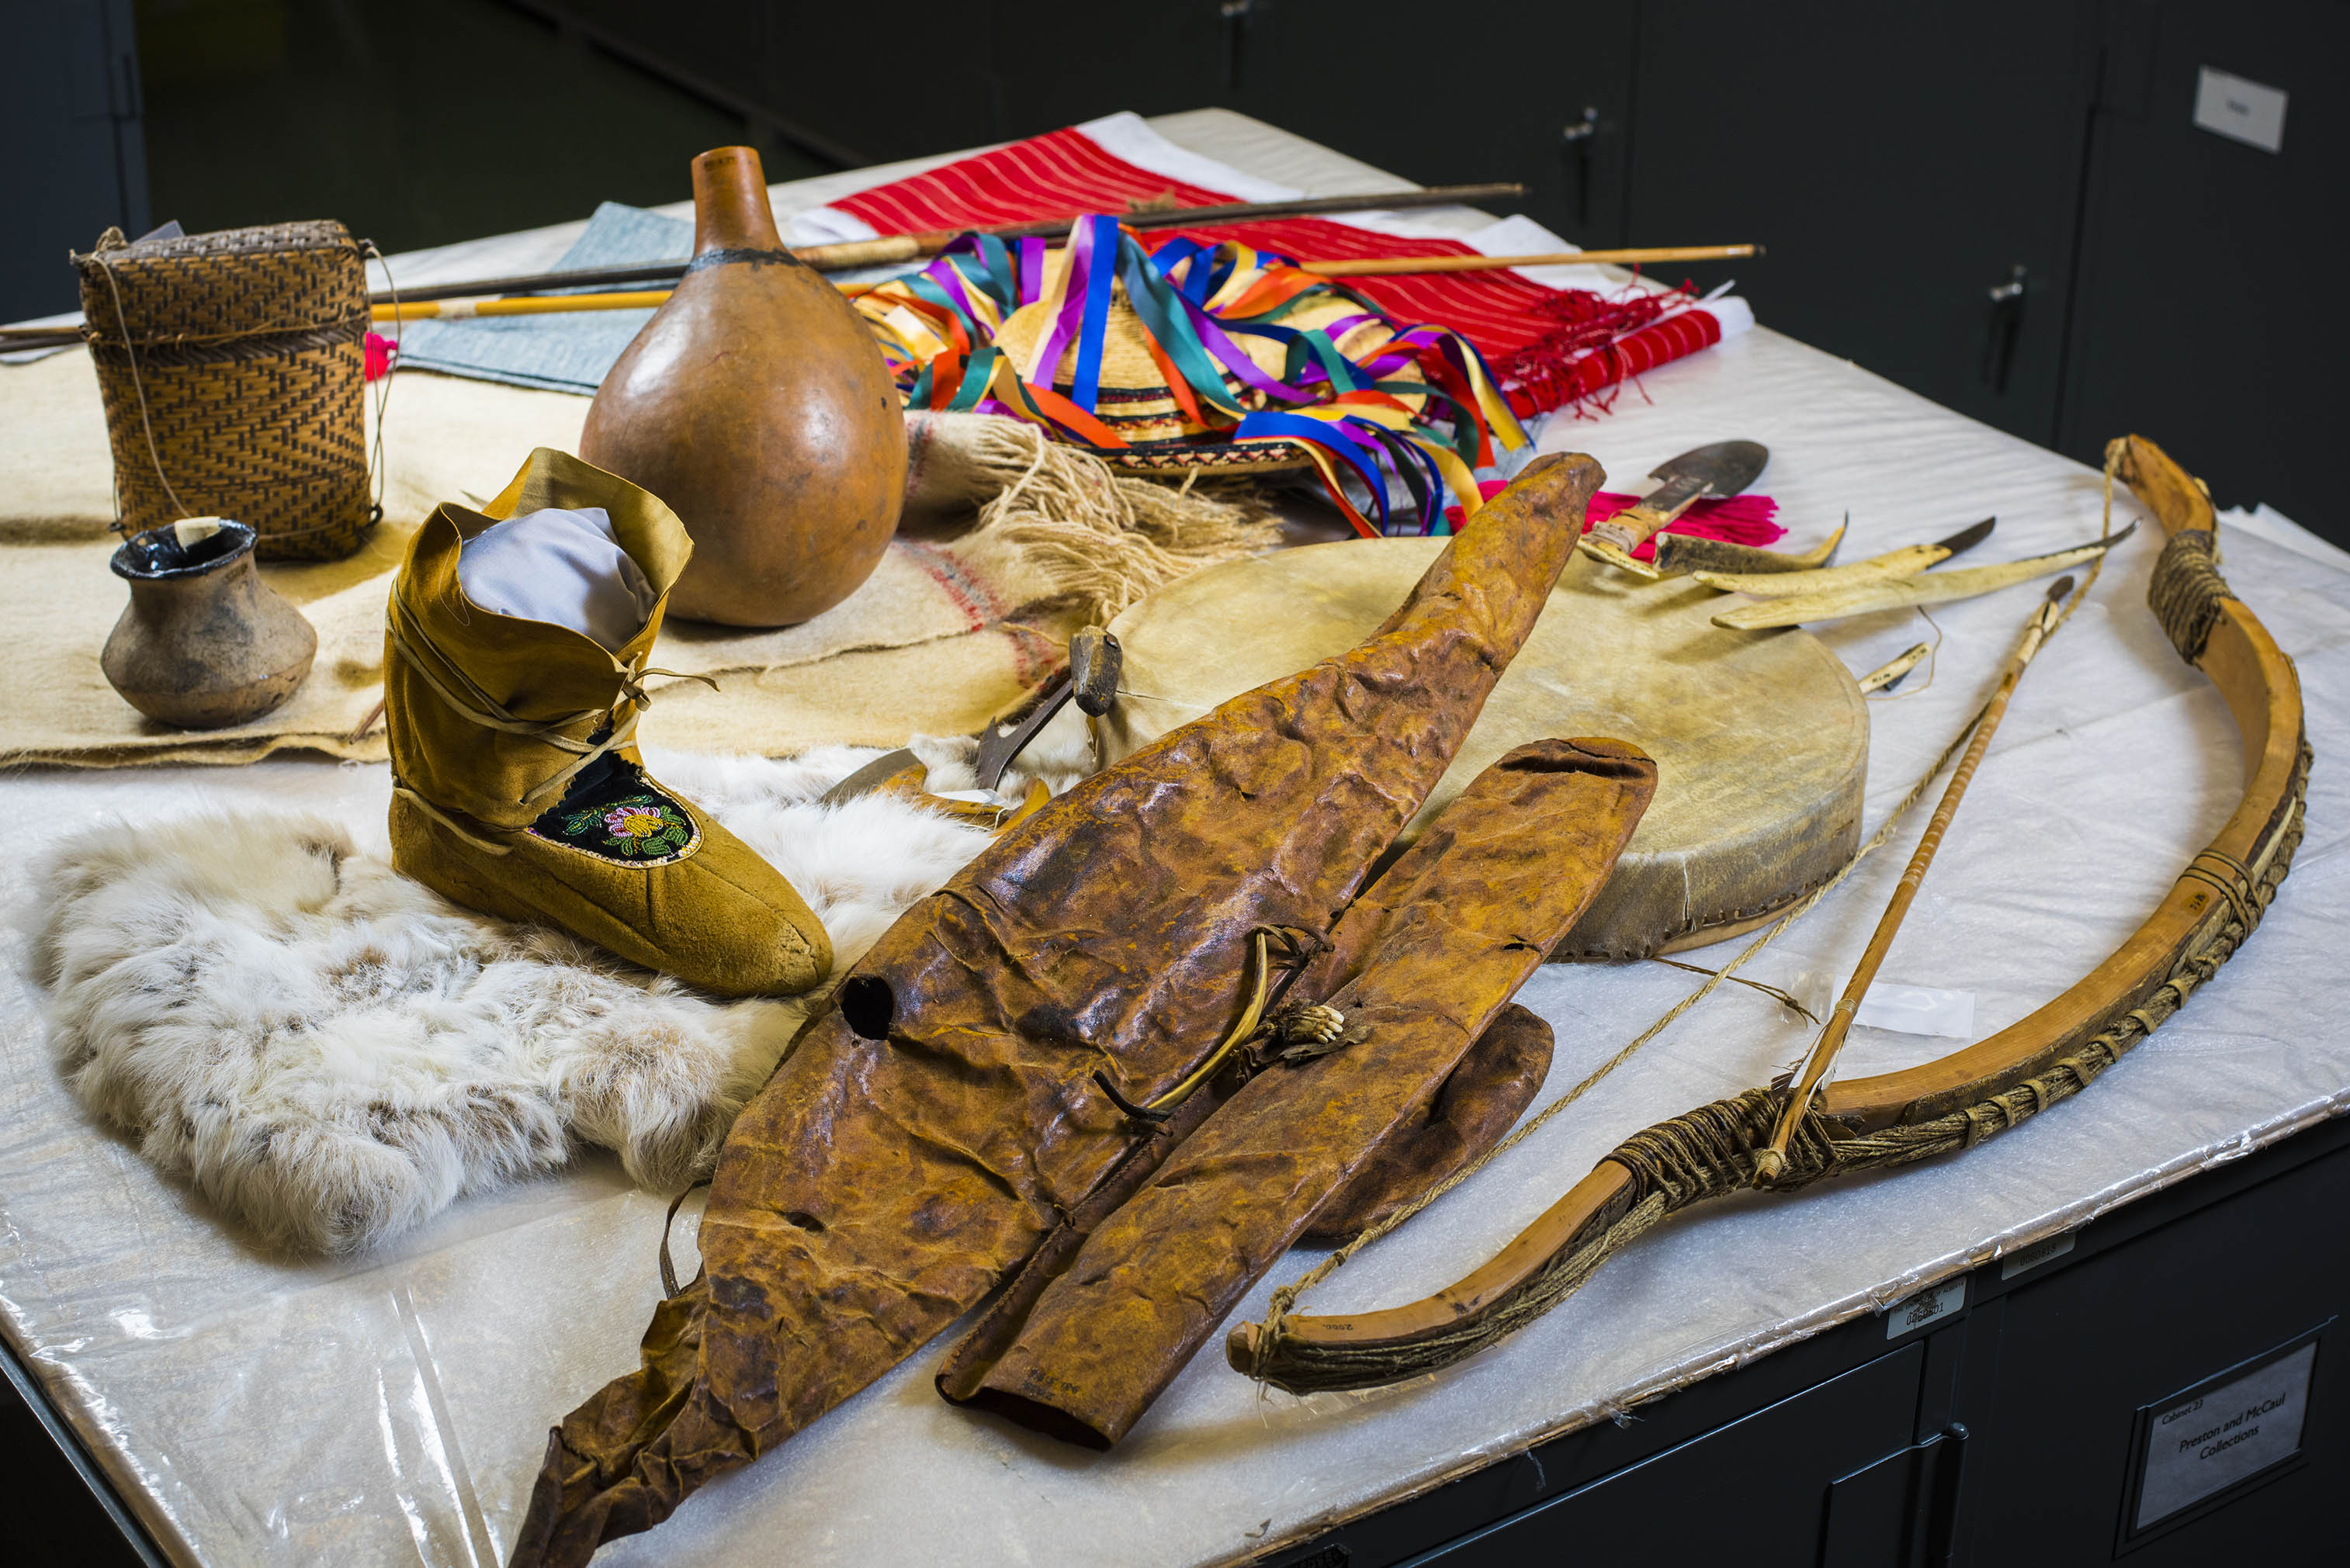 Artifacts on a covered table, including a moccassin, a piece of white fur, a bow, and two flattened, dried leather satchels.